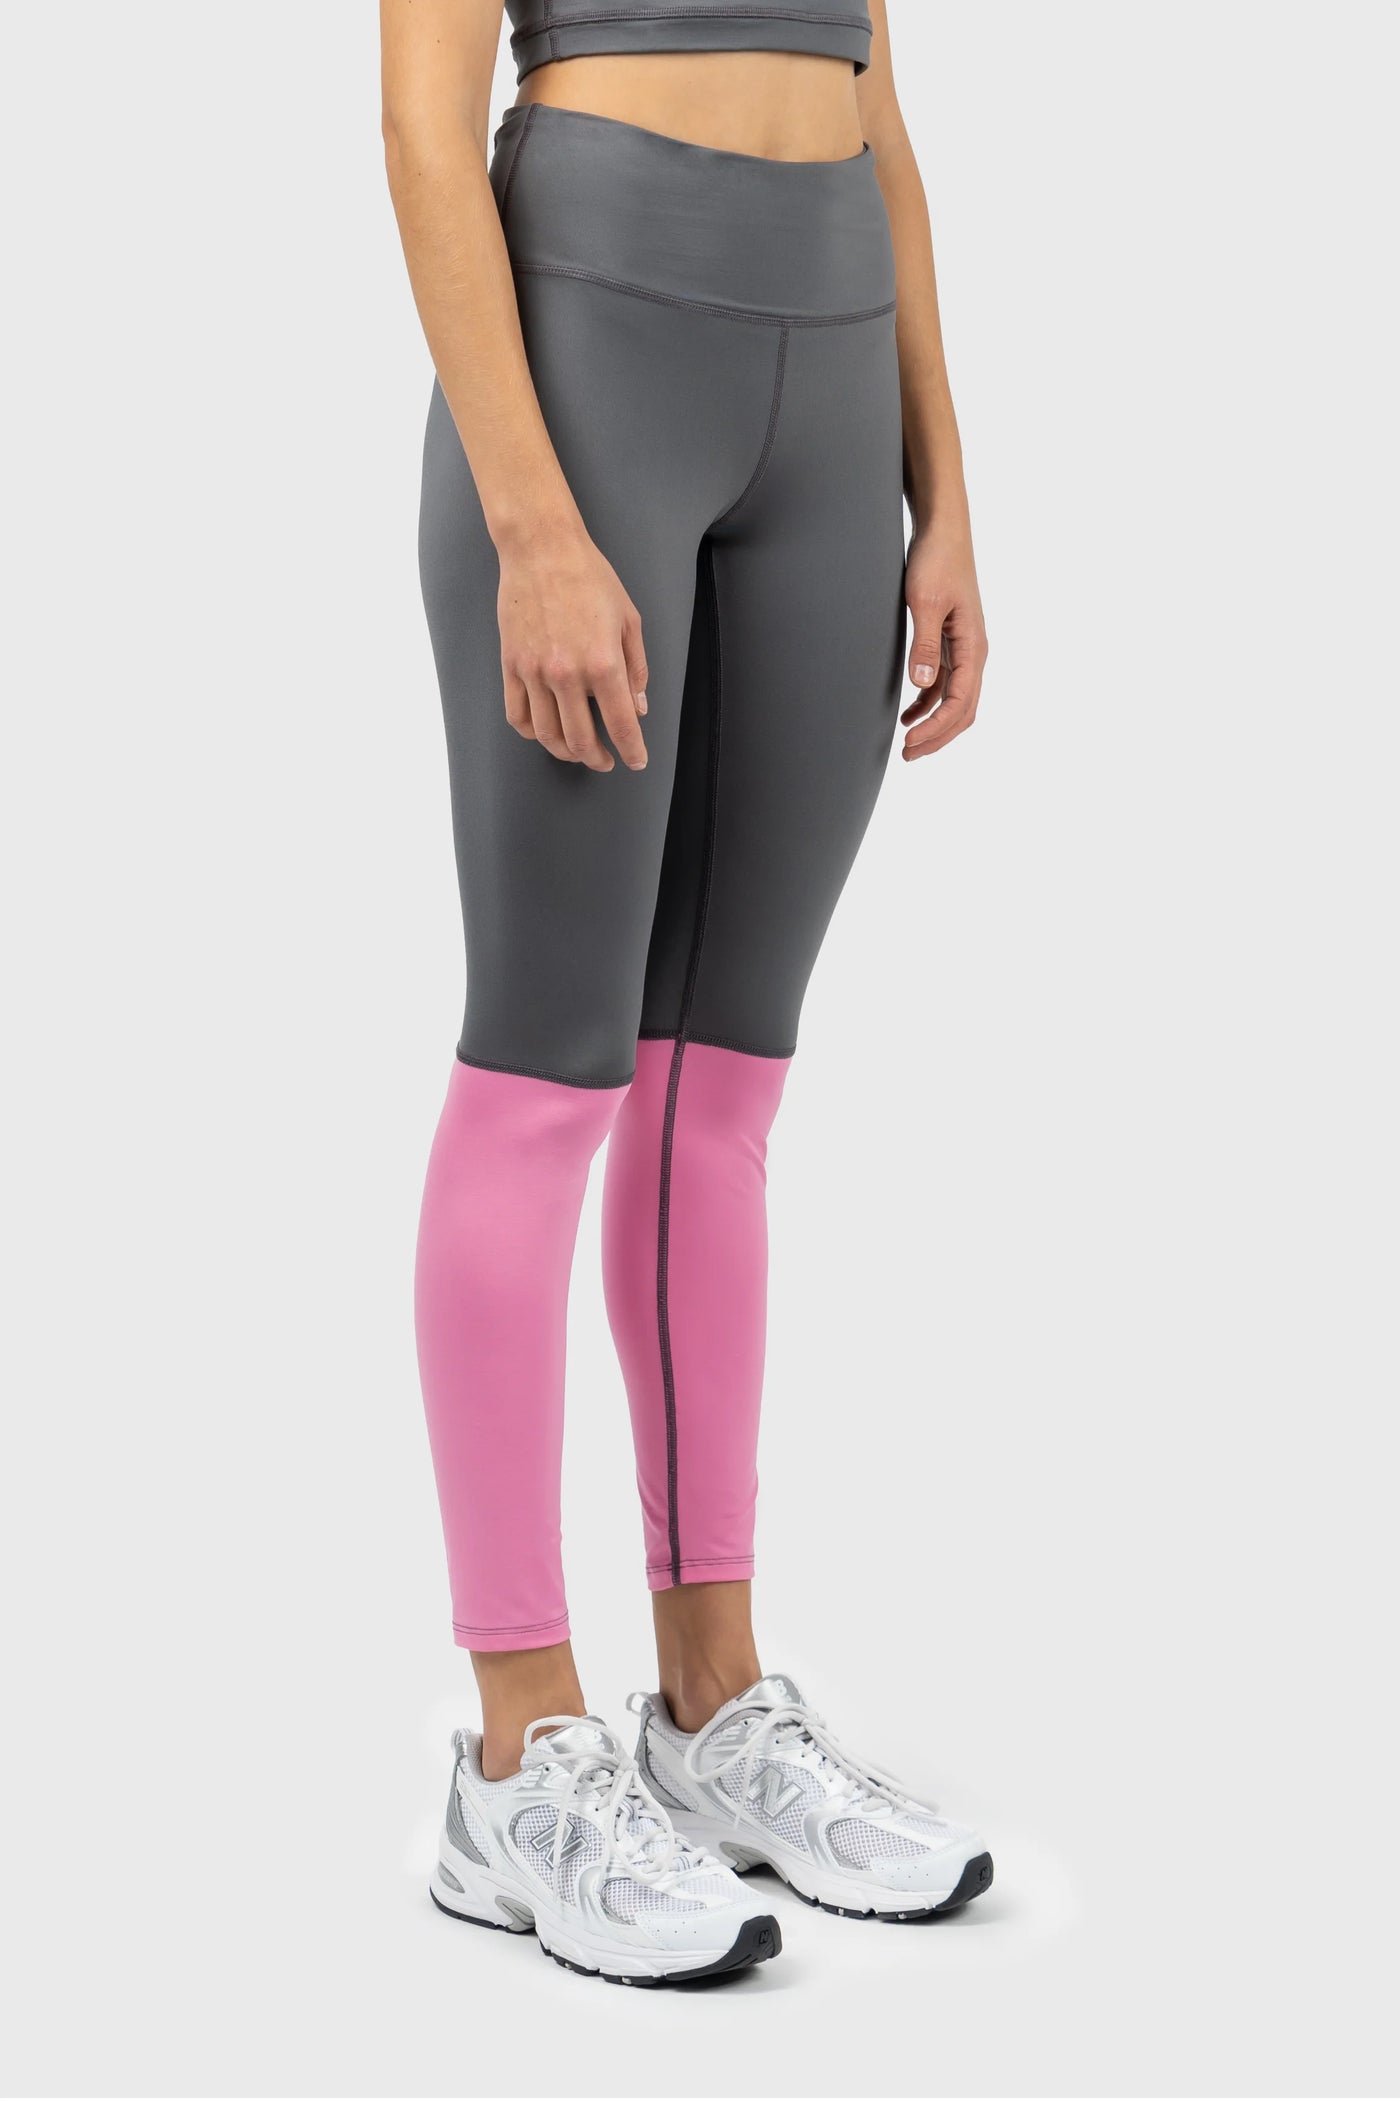 Grey and Pink Active Long Leggings